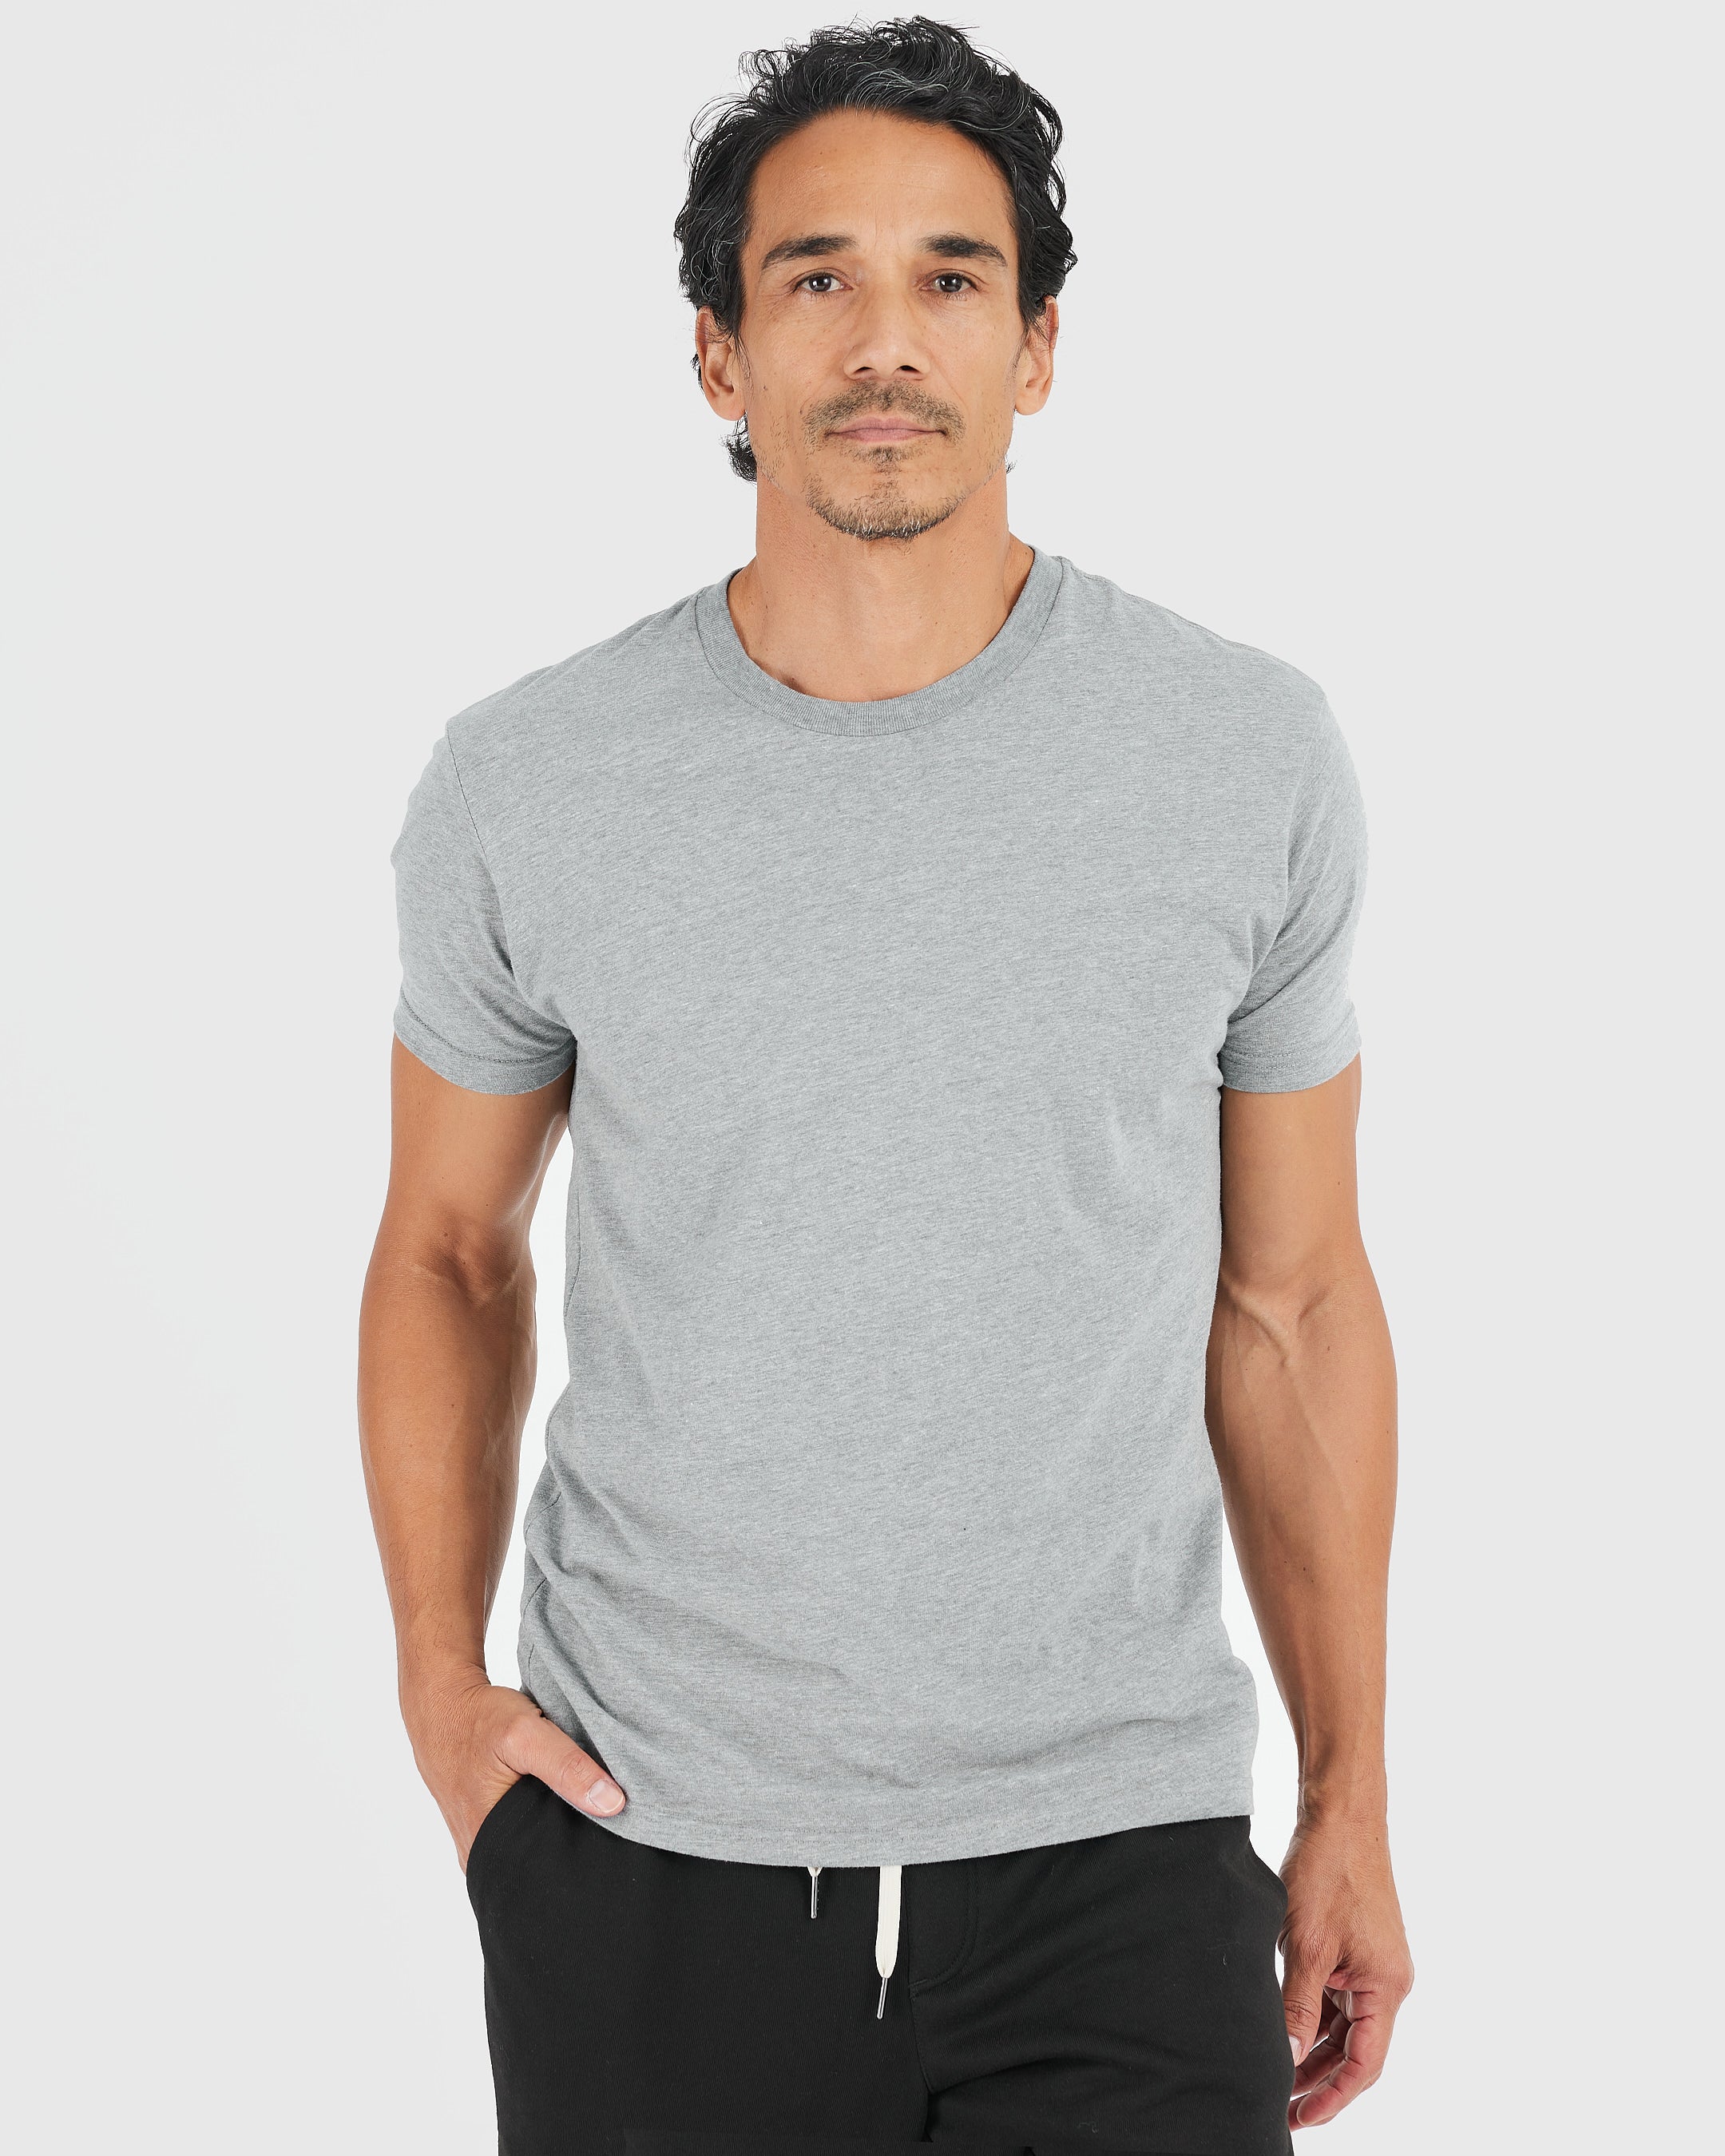 All Heather Gray 6-Pack